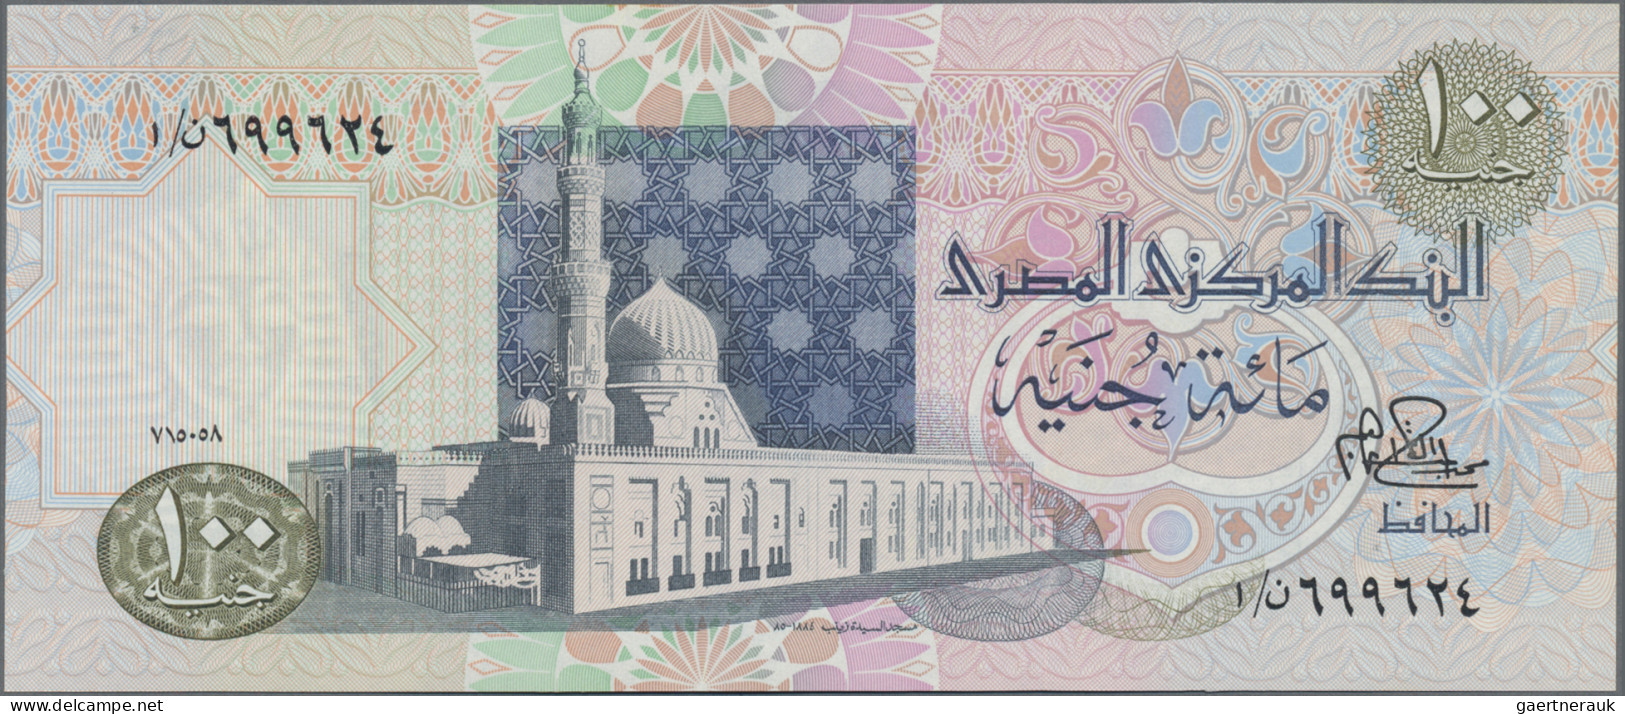 Egypt: National Bank of Egypt, huge lot with 35 banknotes, series 1970-2009, com